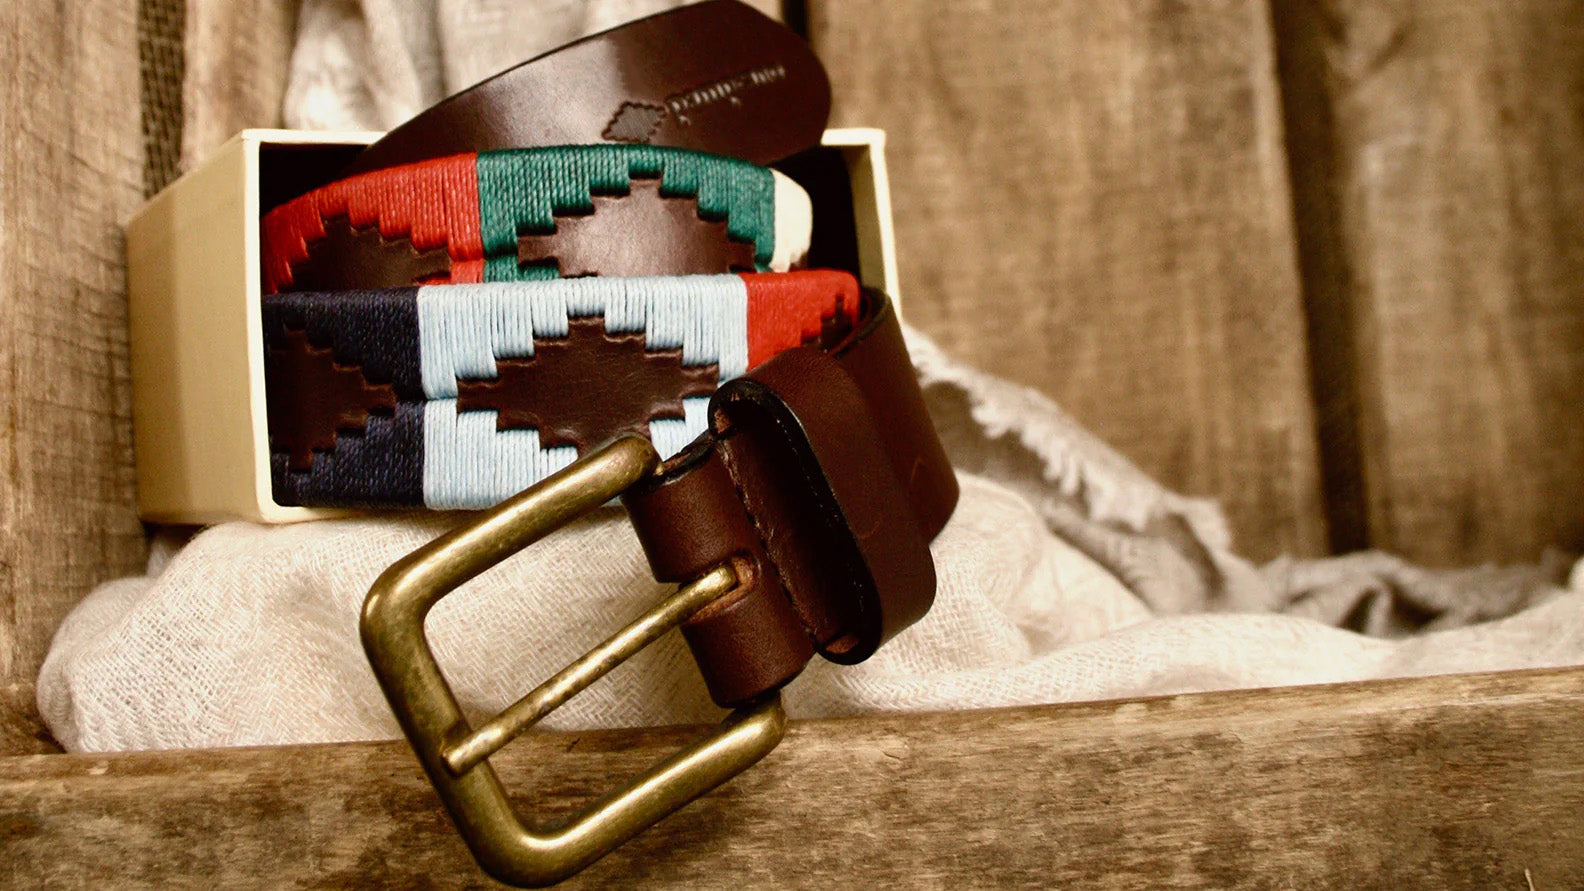 Introducing Pampeano - Handmade Leather Belts & Accessories